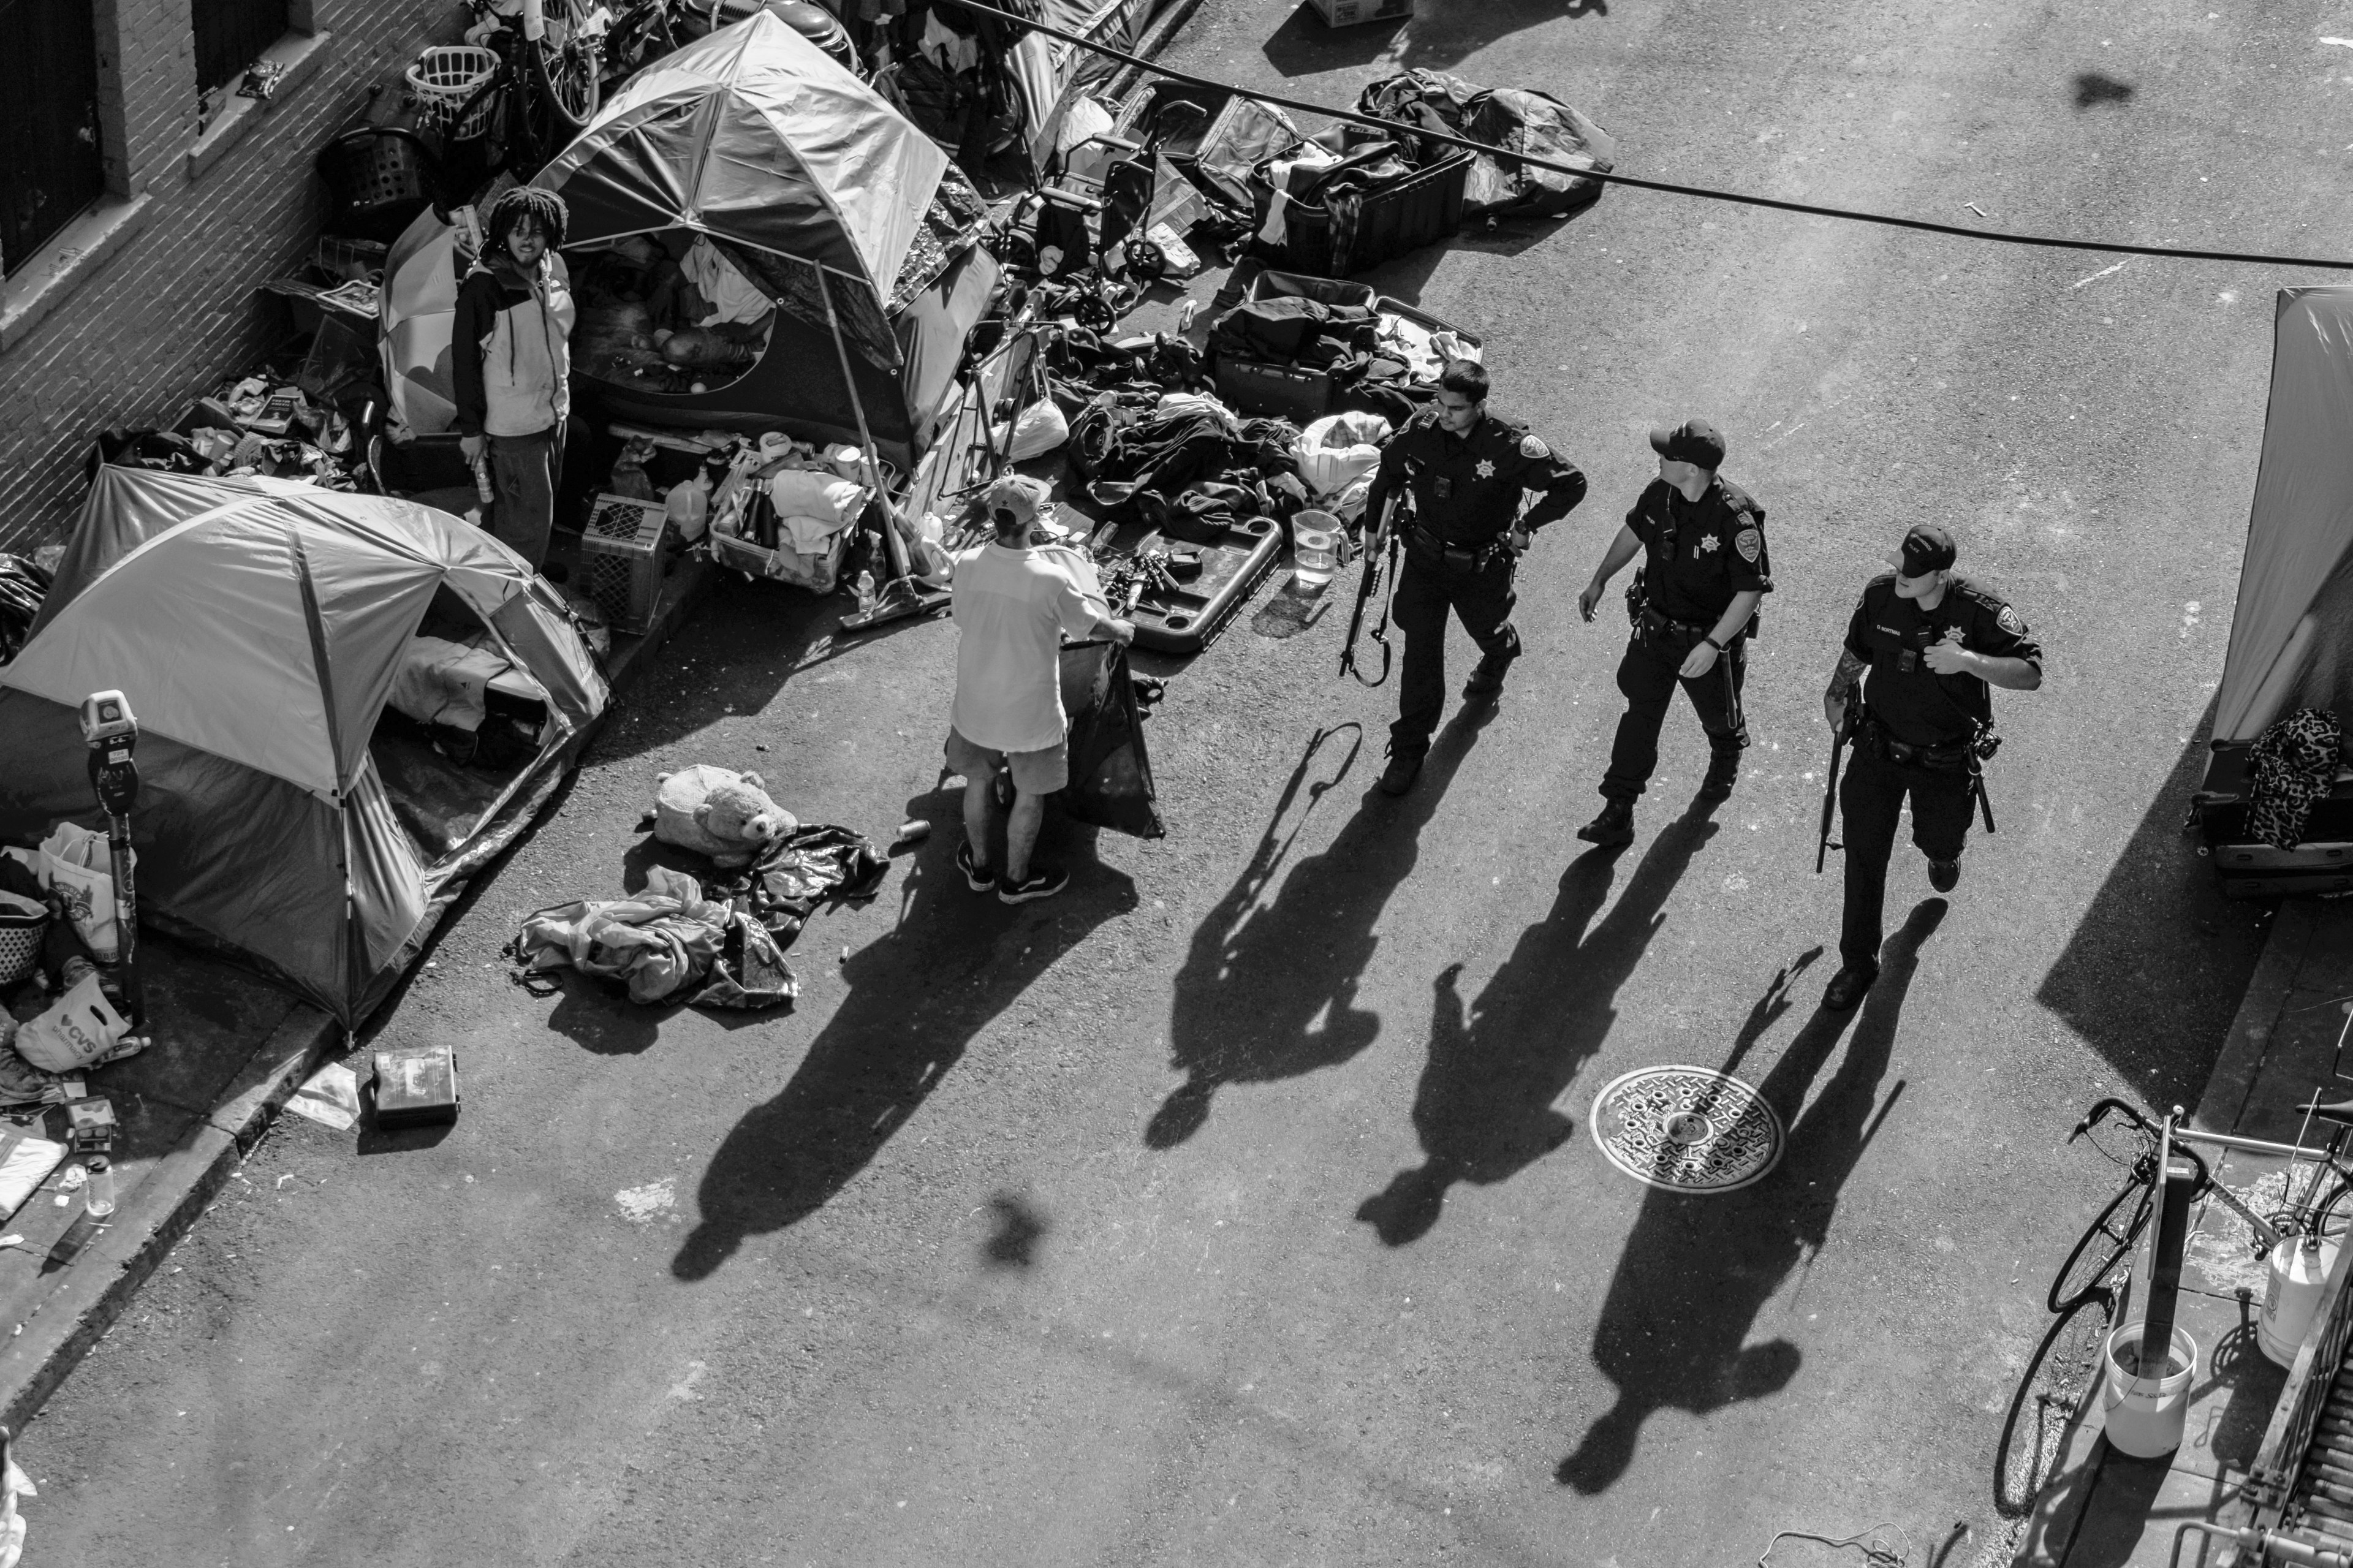 An overhead shot of a San Francisco street with tents, scattered items, and three officers standing together casting long shadows.